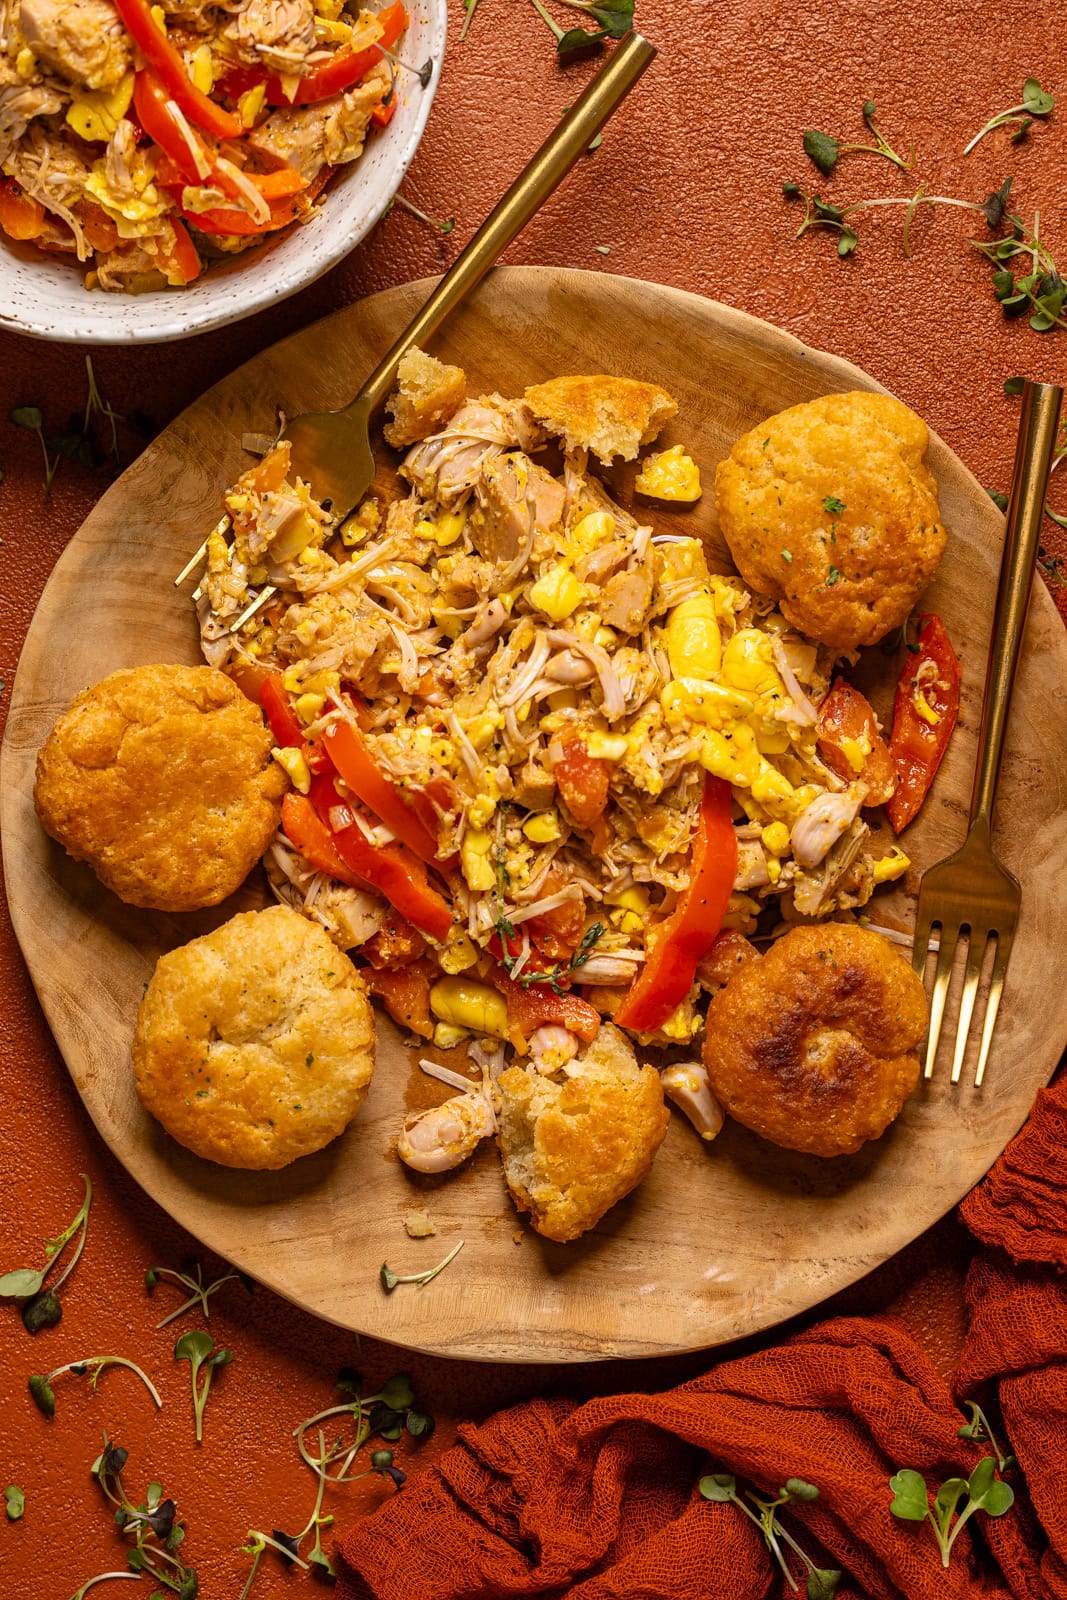 Ackee and saltfish with dumplings on a wooden plate with a fork and tea.